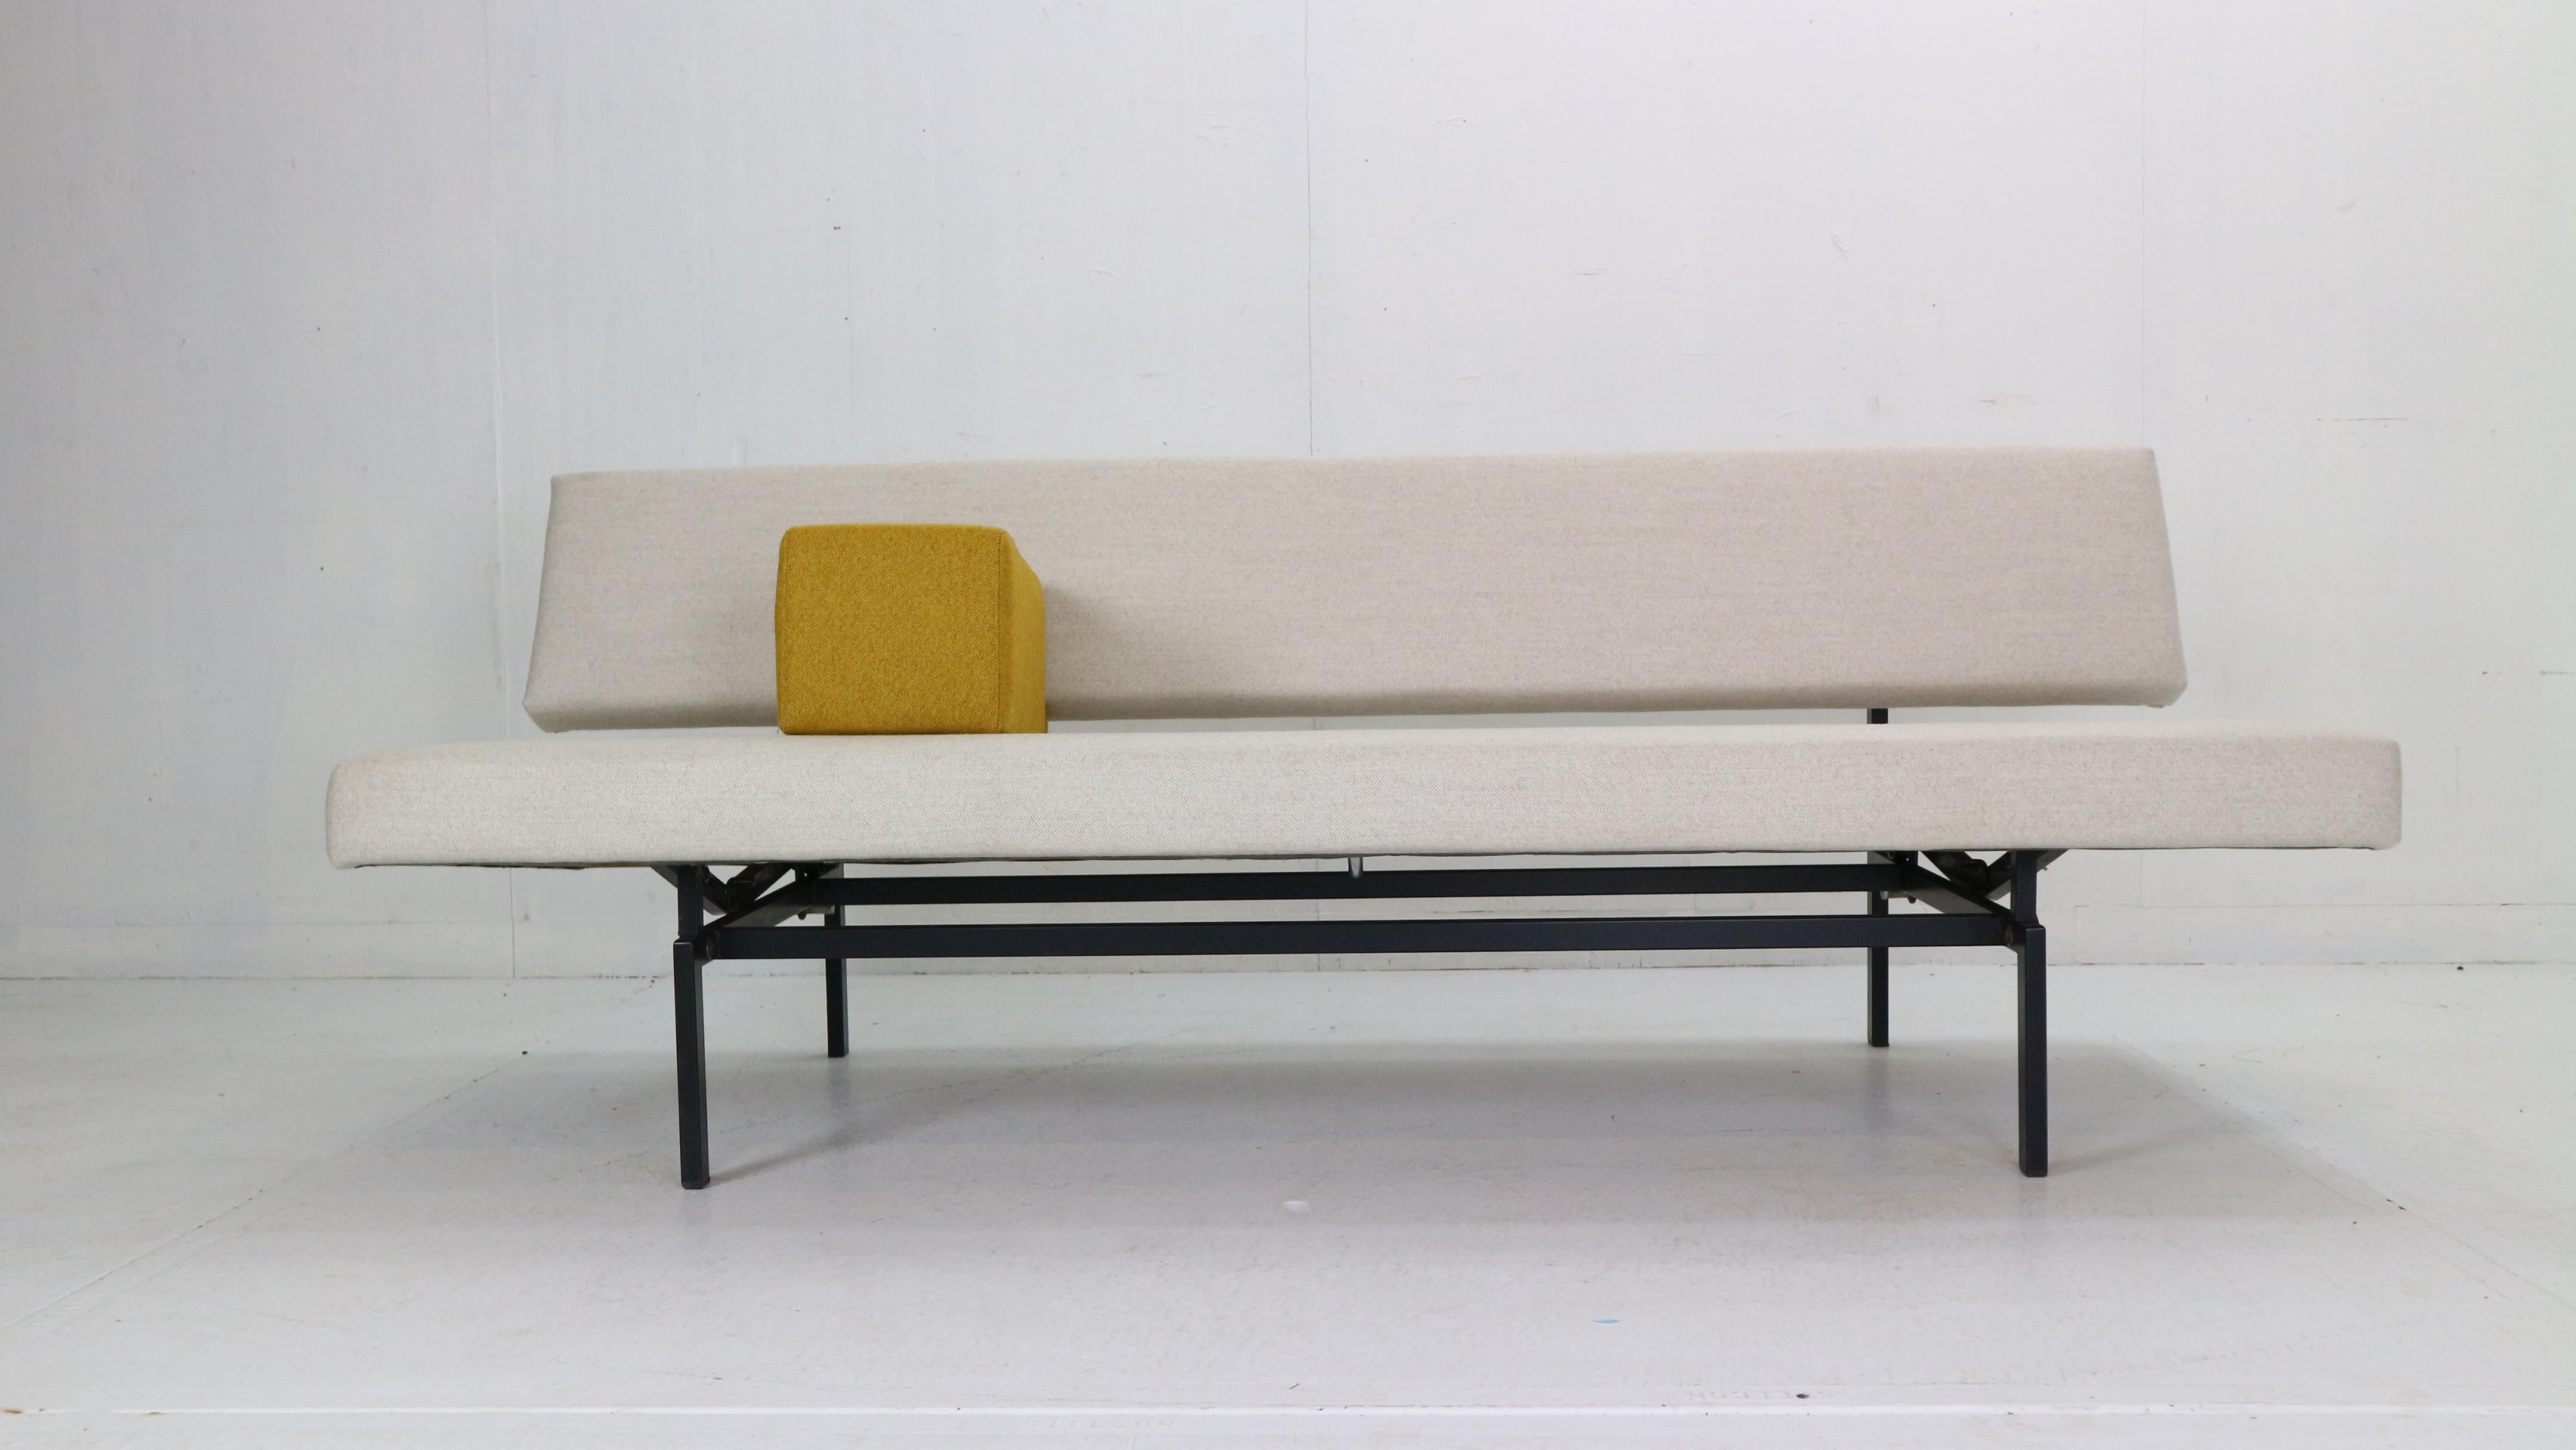 Minimalistic midcentury design sofa-daybed designed by Gijs Van Der Sluis, 1961s, Netherlands.
Model- 540.
Metal black frame and new upholstery in broken white wool fabric and yellow armrest.
The bottom pulls away from seat back to level out and